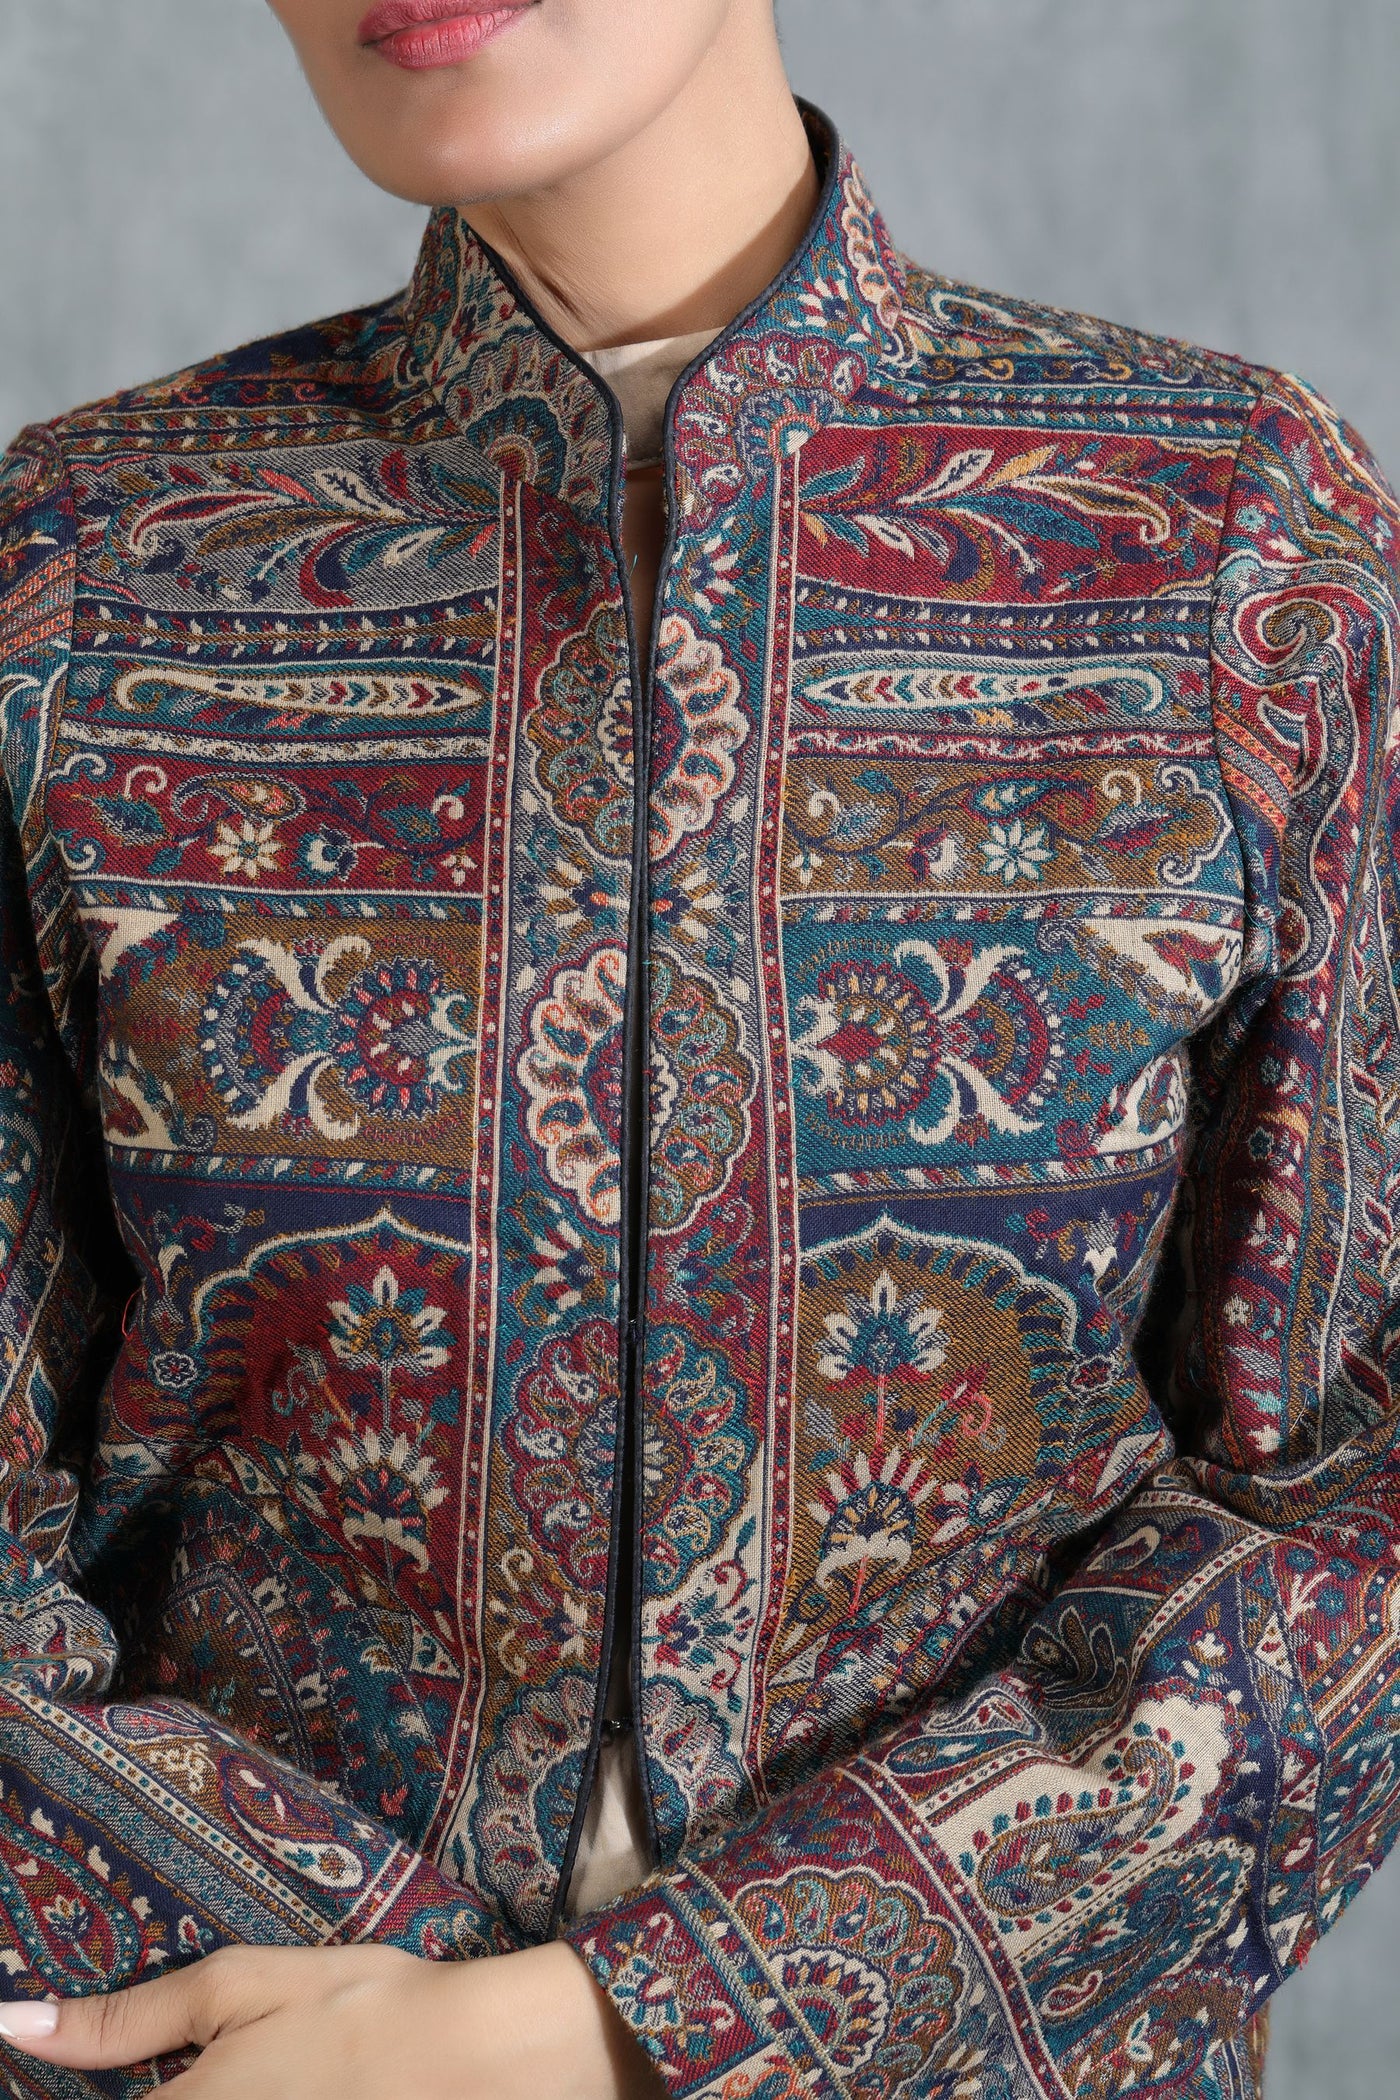 Vintage Full Jacket with Paisley Design